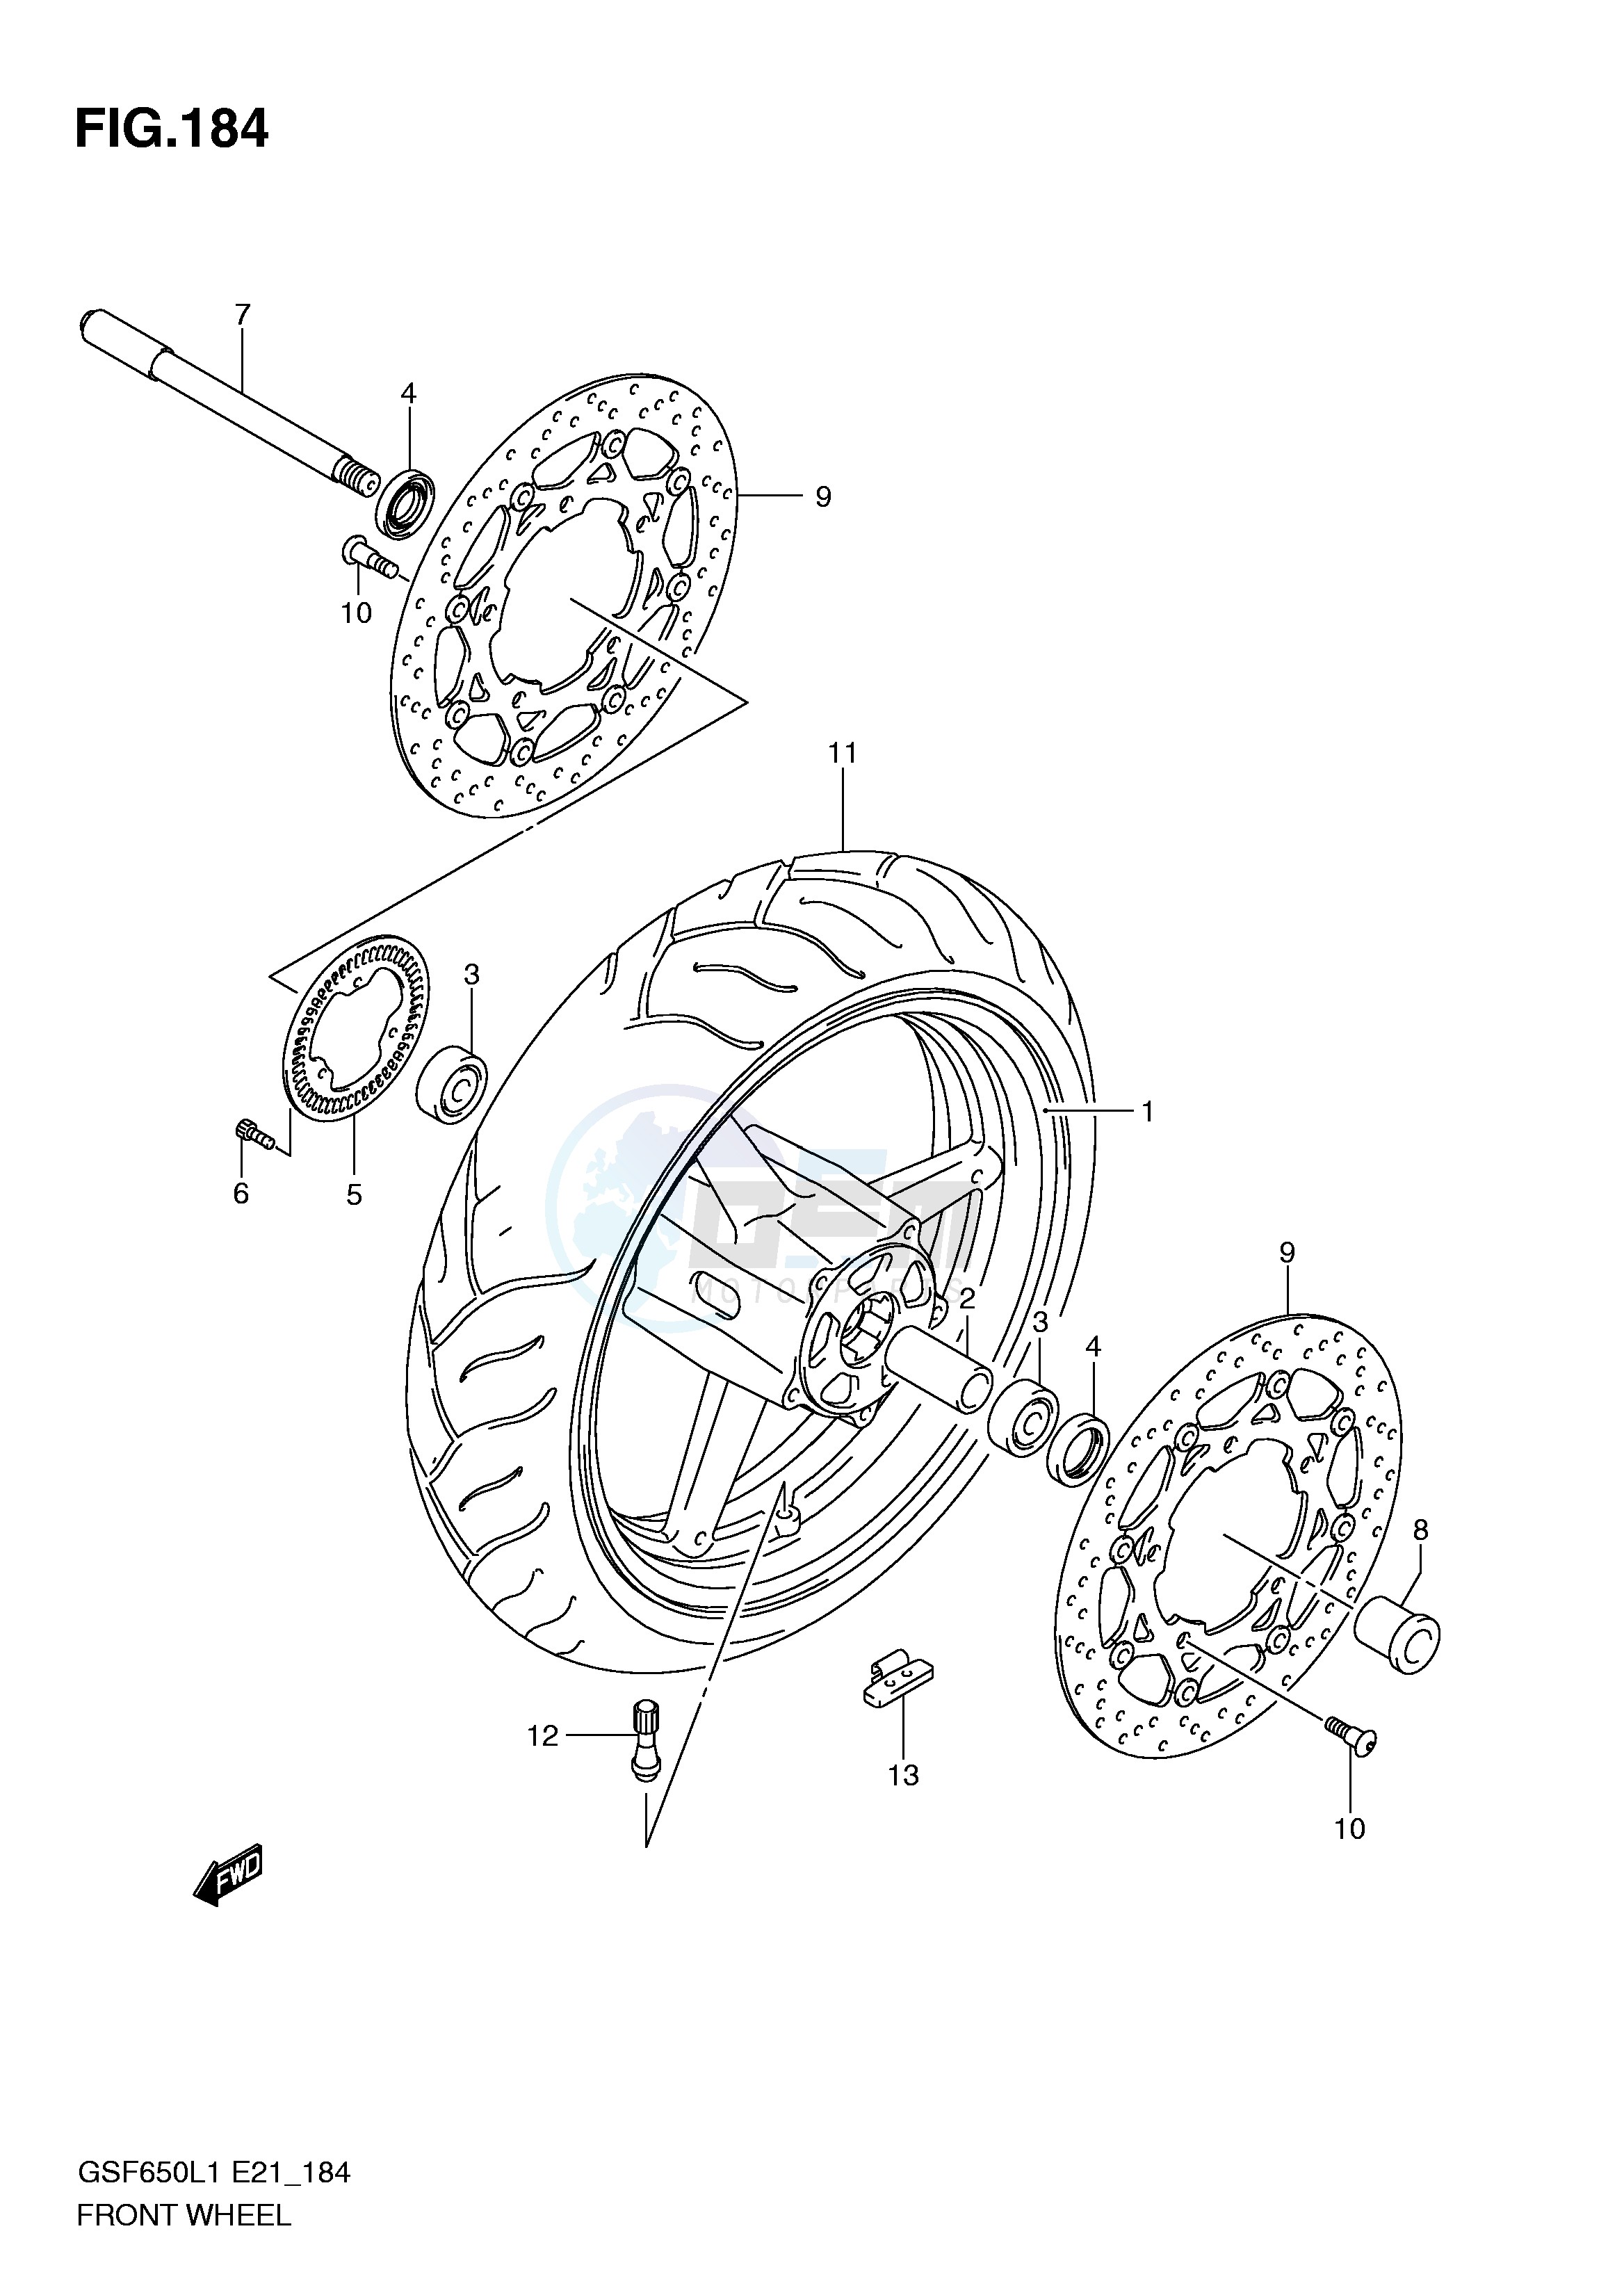 FRONT WHEEL (GSF650SUAL1 E21) blueprint